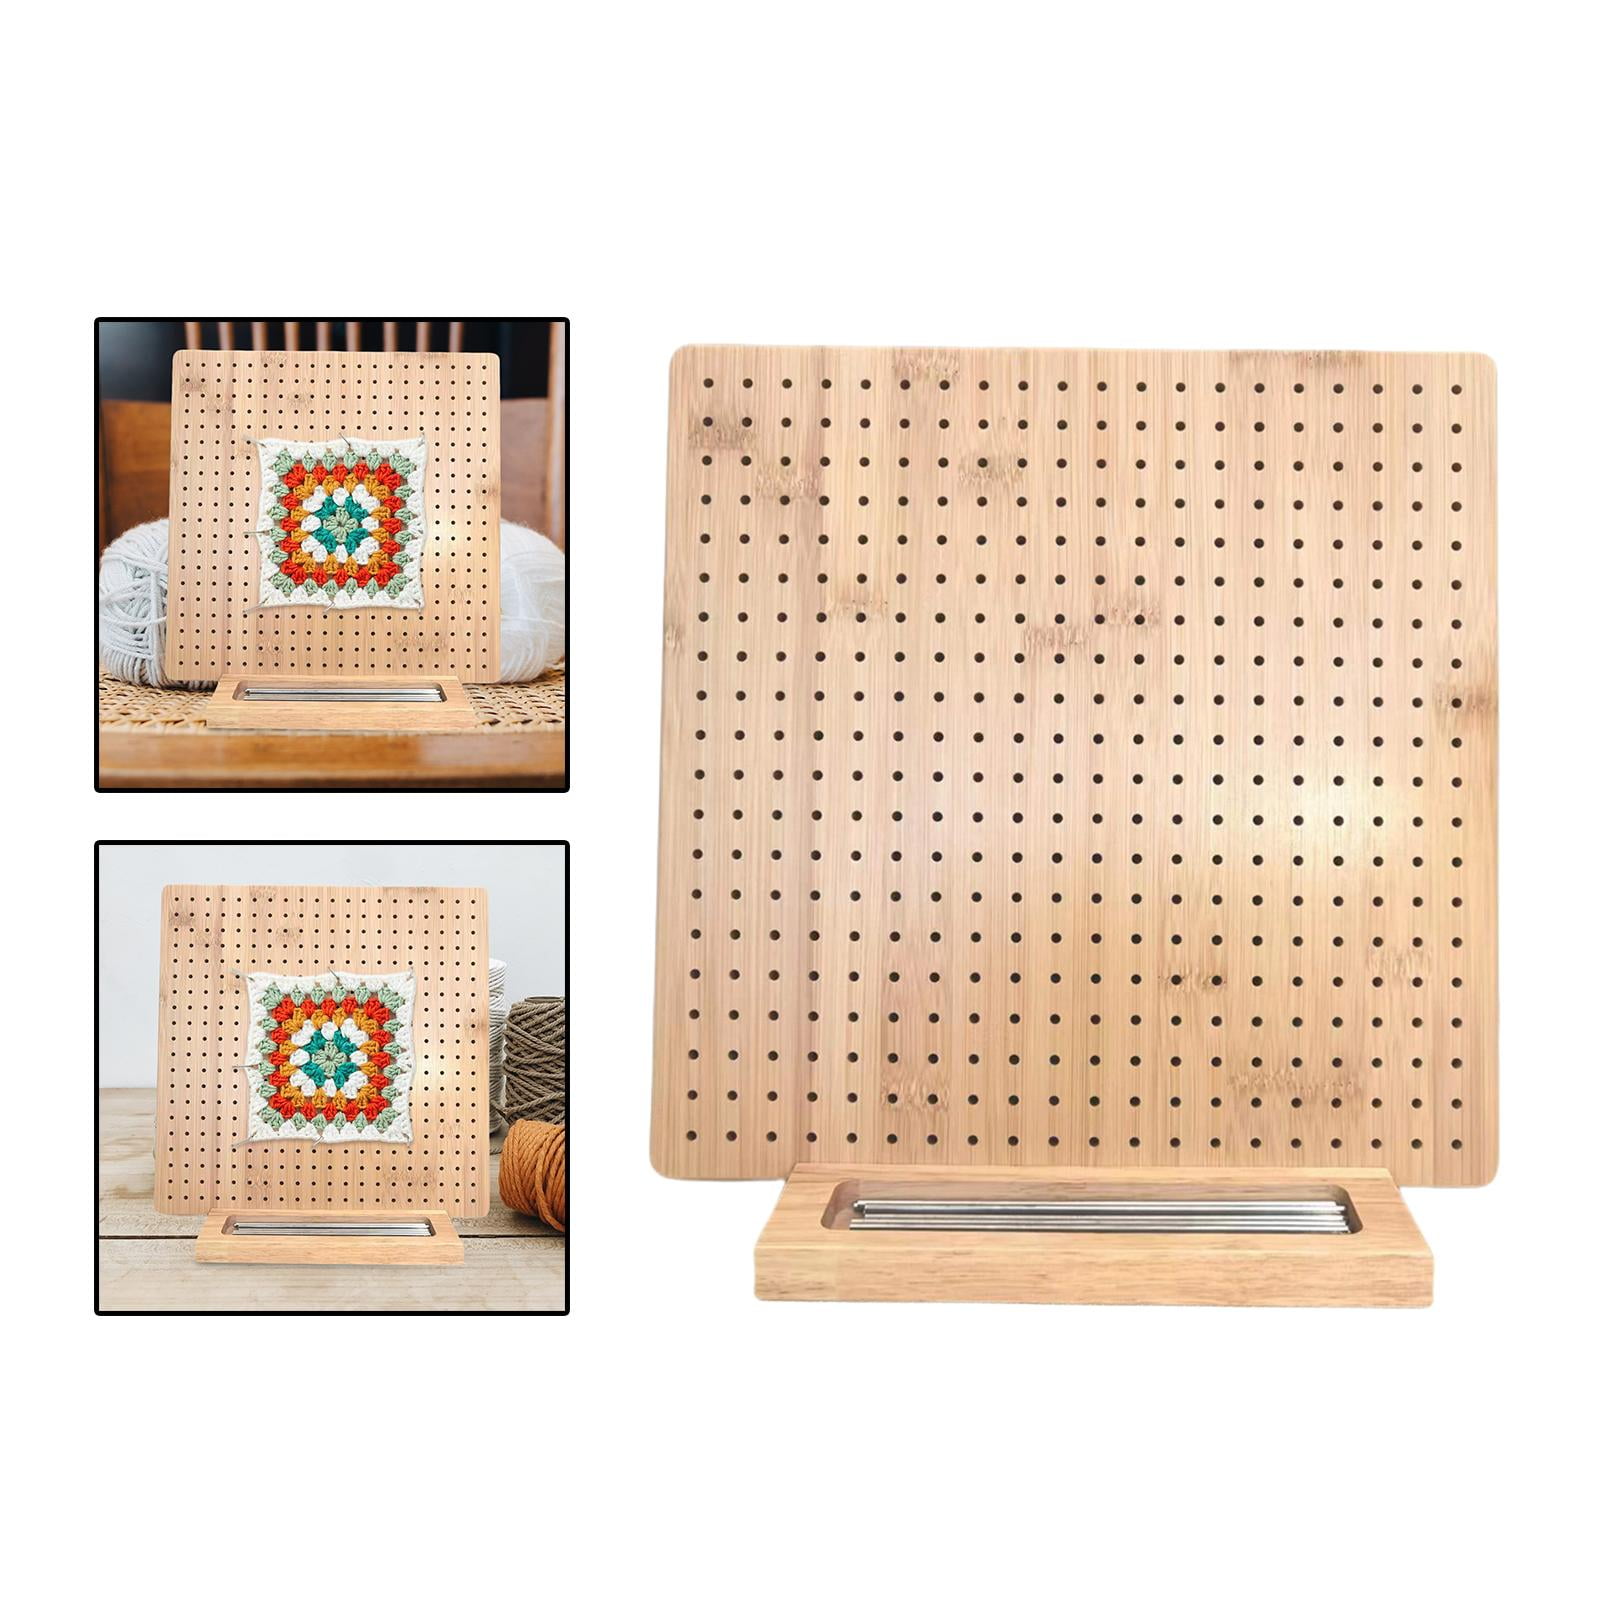 Macrame Board with Grids 16x12inch Double Side Macrame Project Board with .c